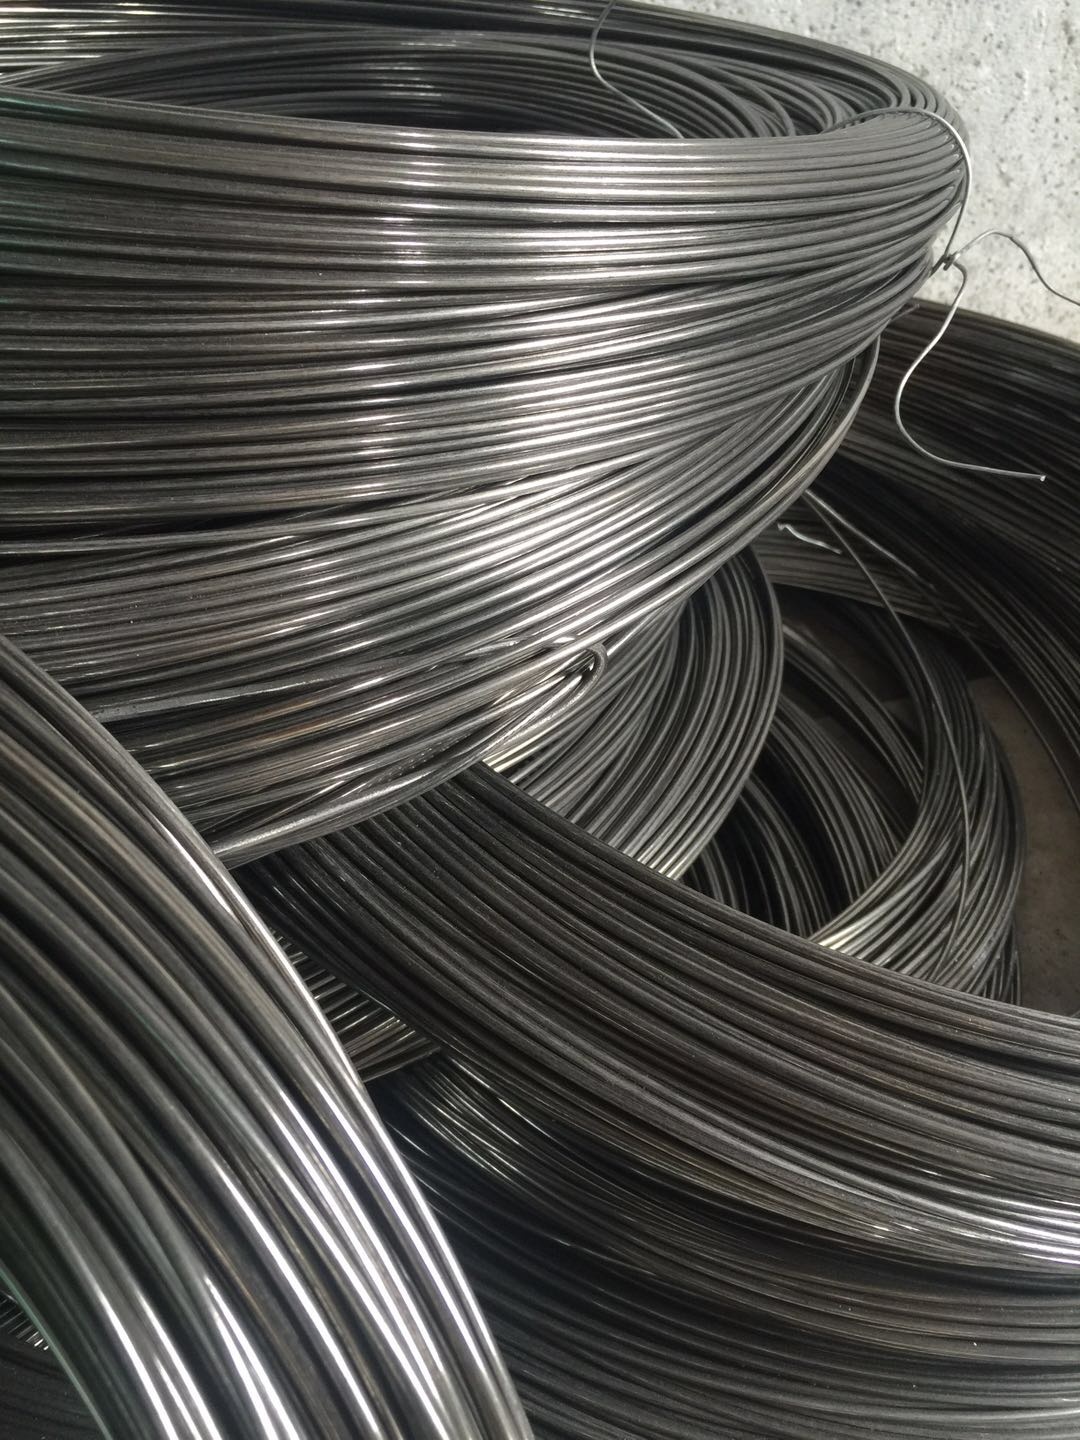 Permeability 49, Hy-Ra 49 Alloy, Soft Magnetic Alloy